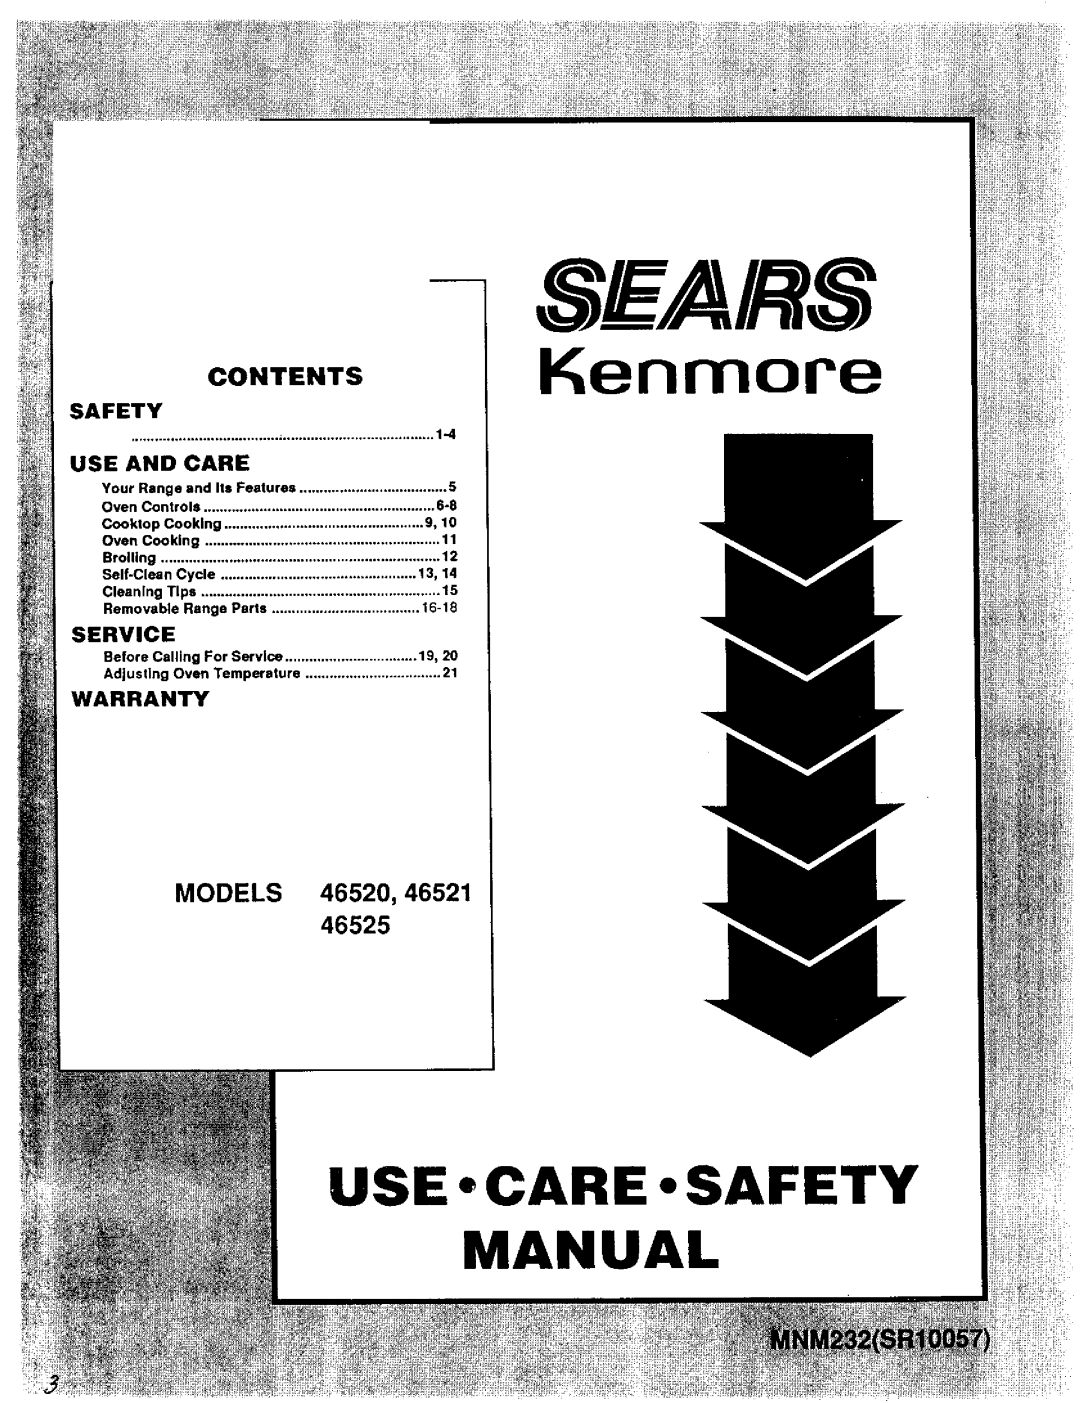 Sears warranty Kenmore, Contents, MODELS 46520,46521, Use And Care, Service, Warranty, Se A/Rs, Use Care Safety 